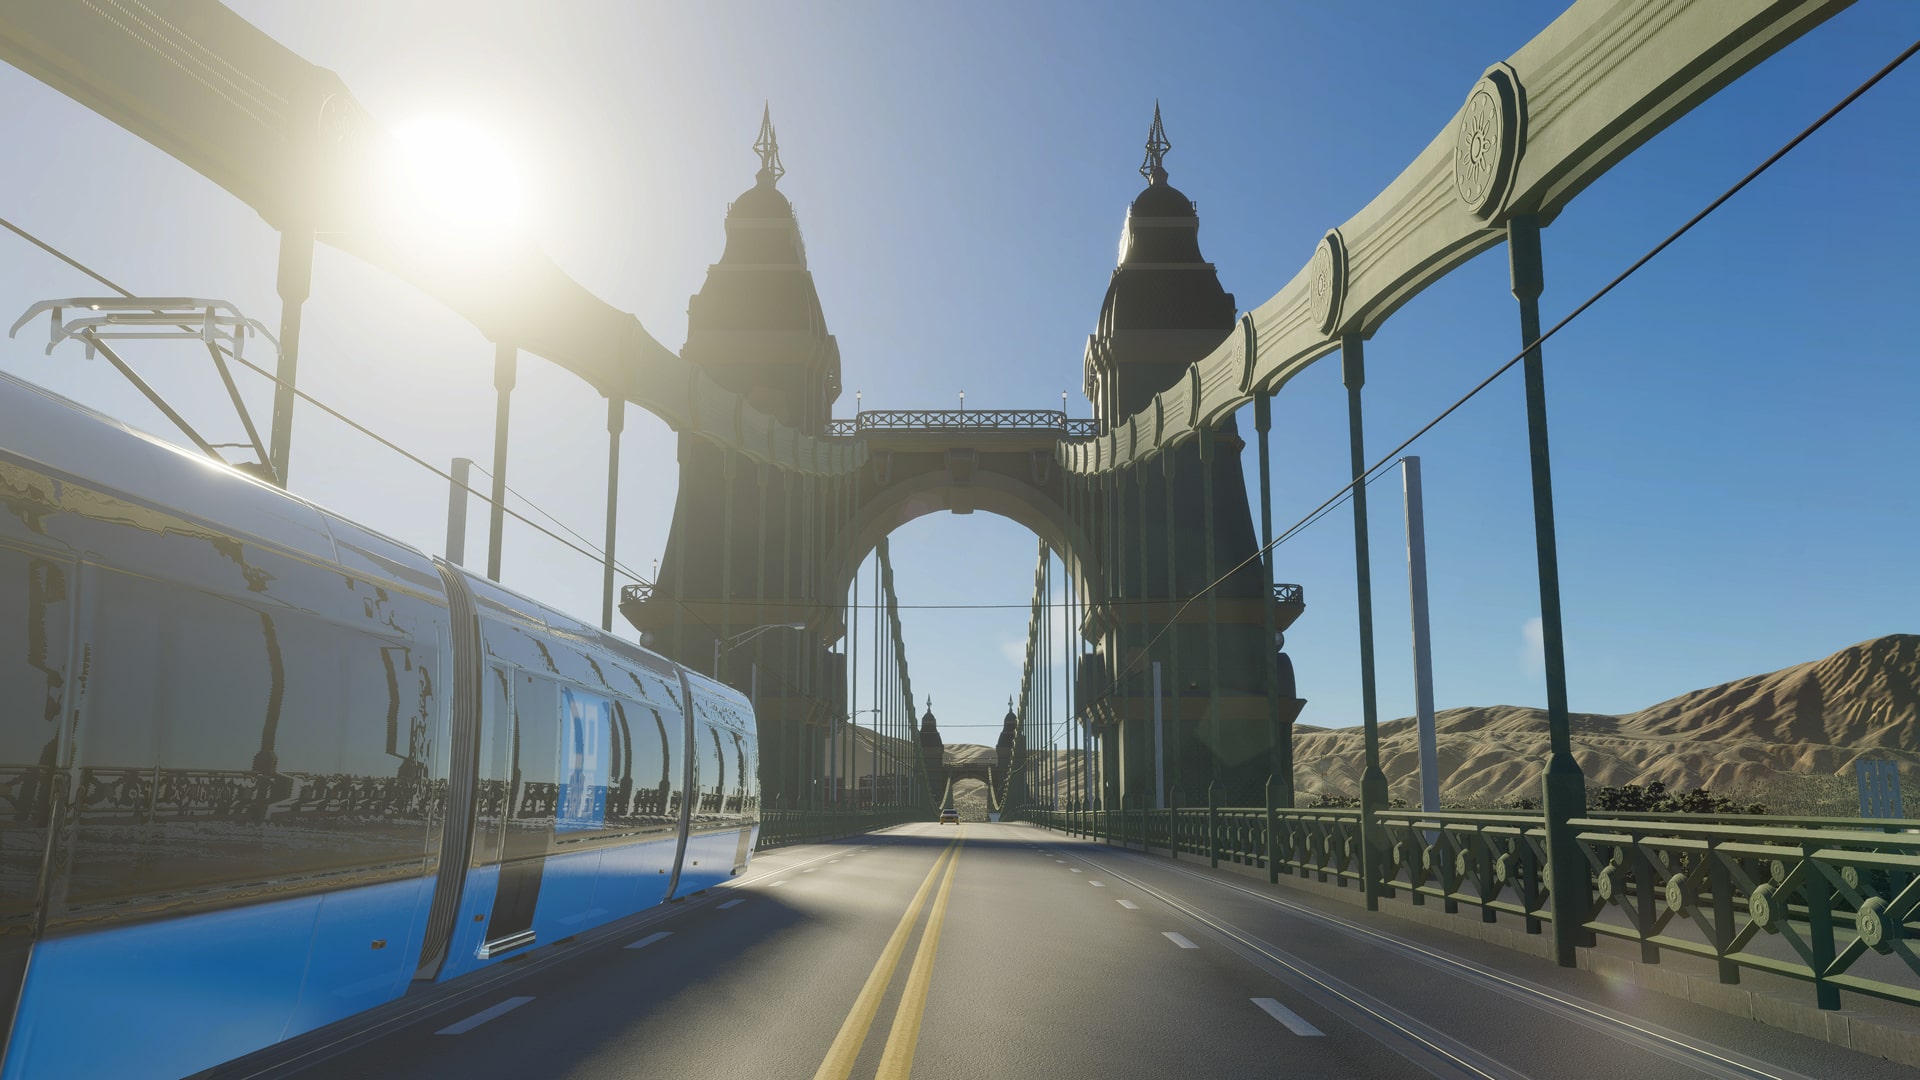 A screenshot from Cities Skylines 2 featuring iconic landmark buildings and citizens' activities